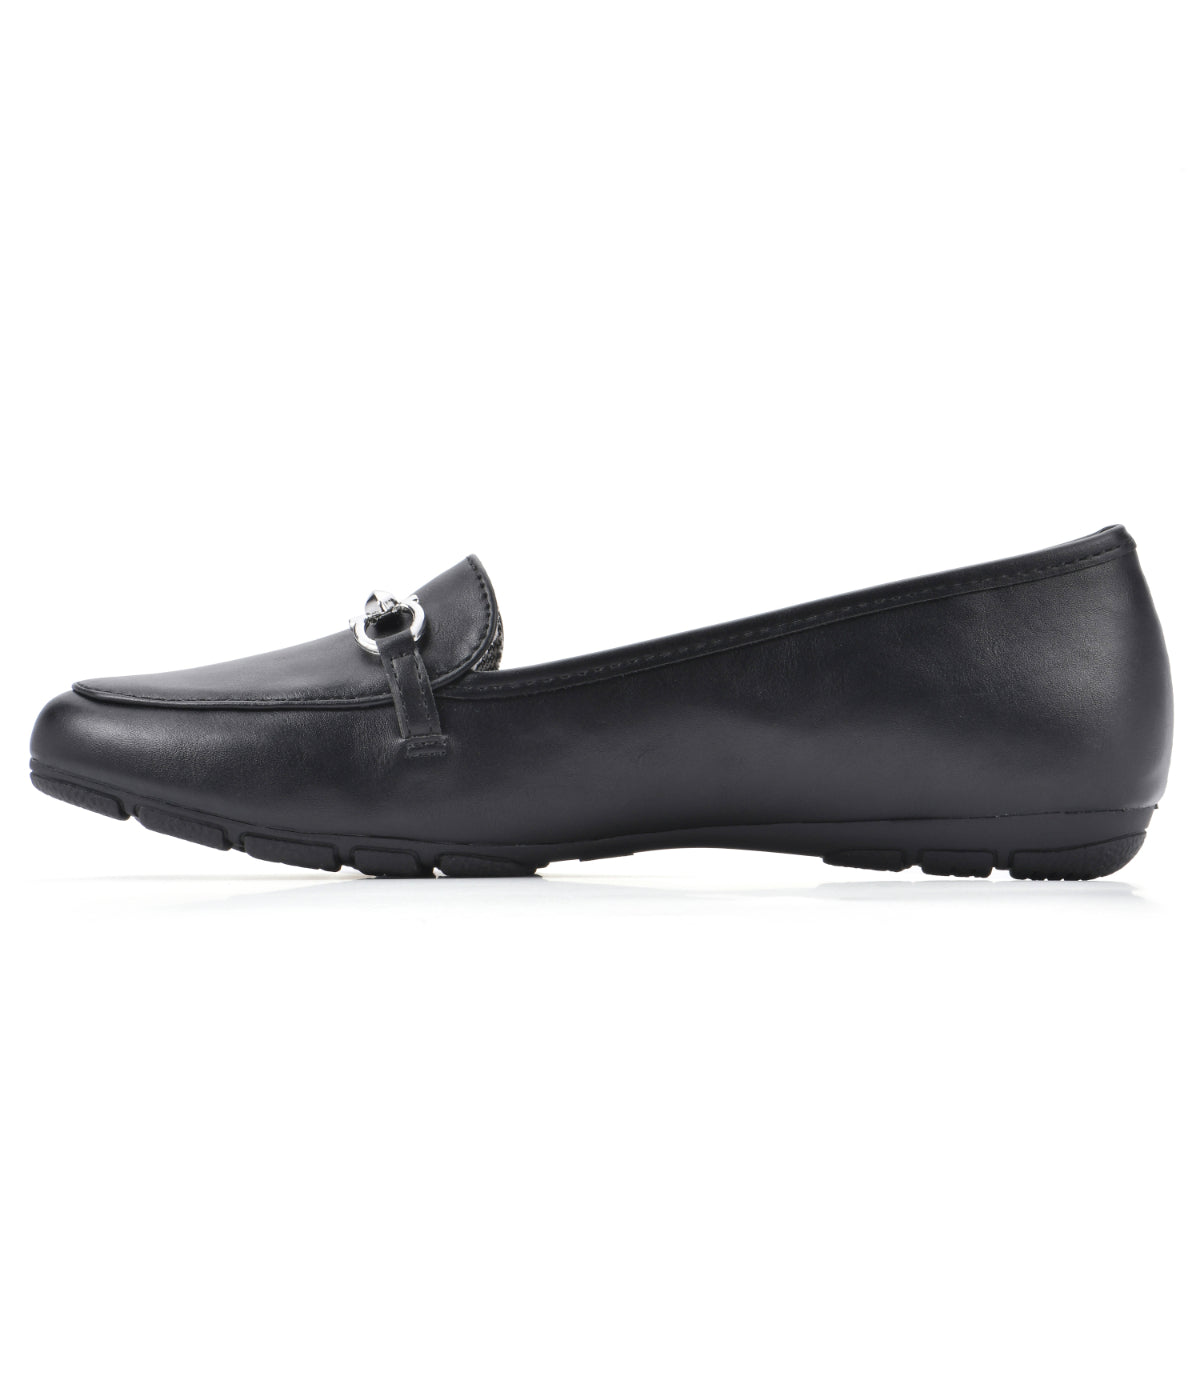 Glowing Loafer Flats Black/Smooth